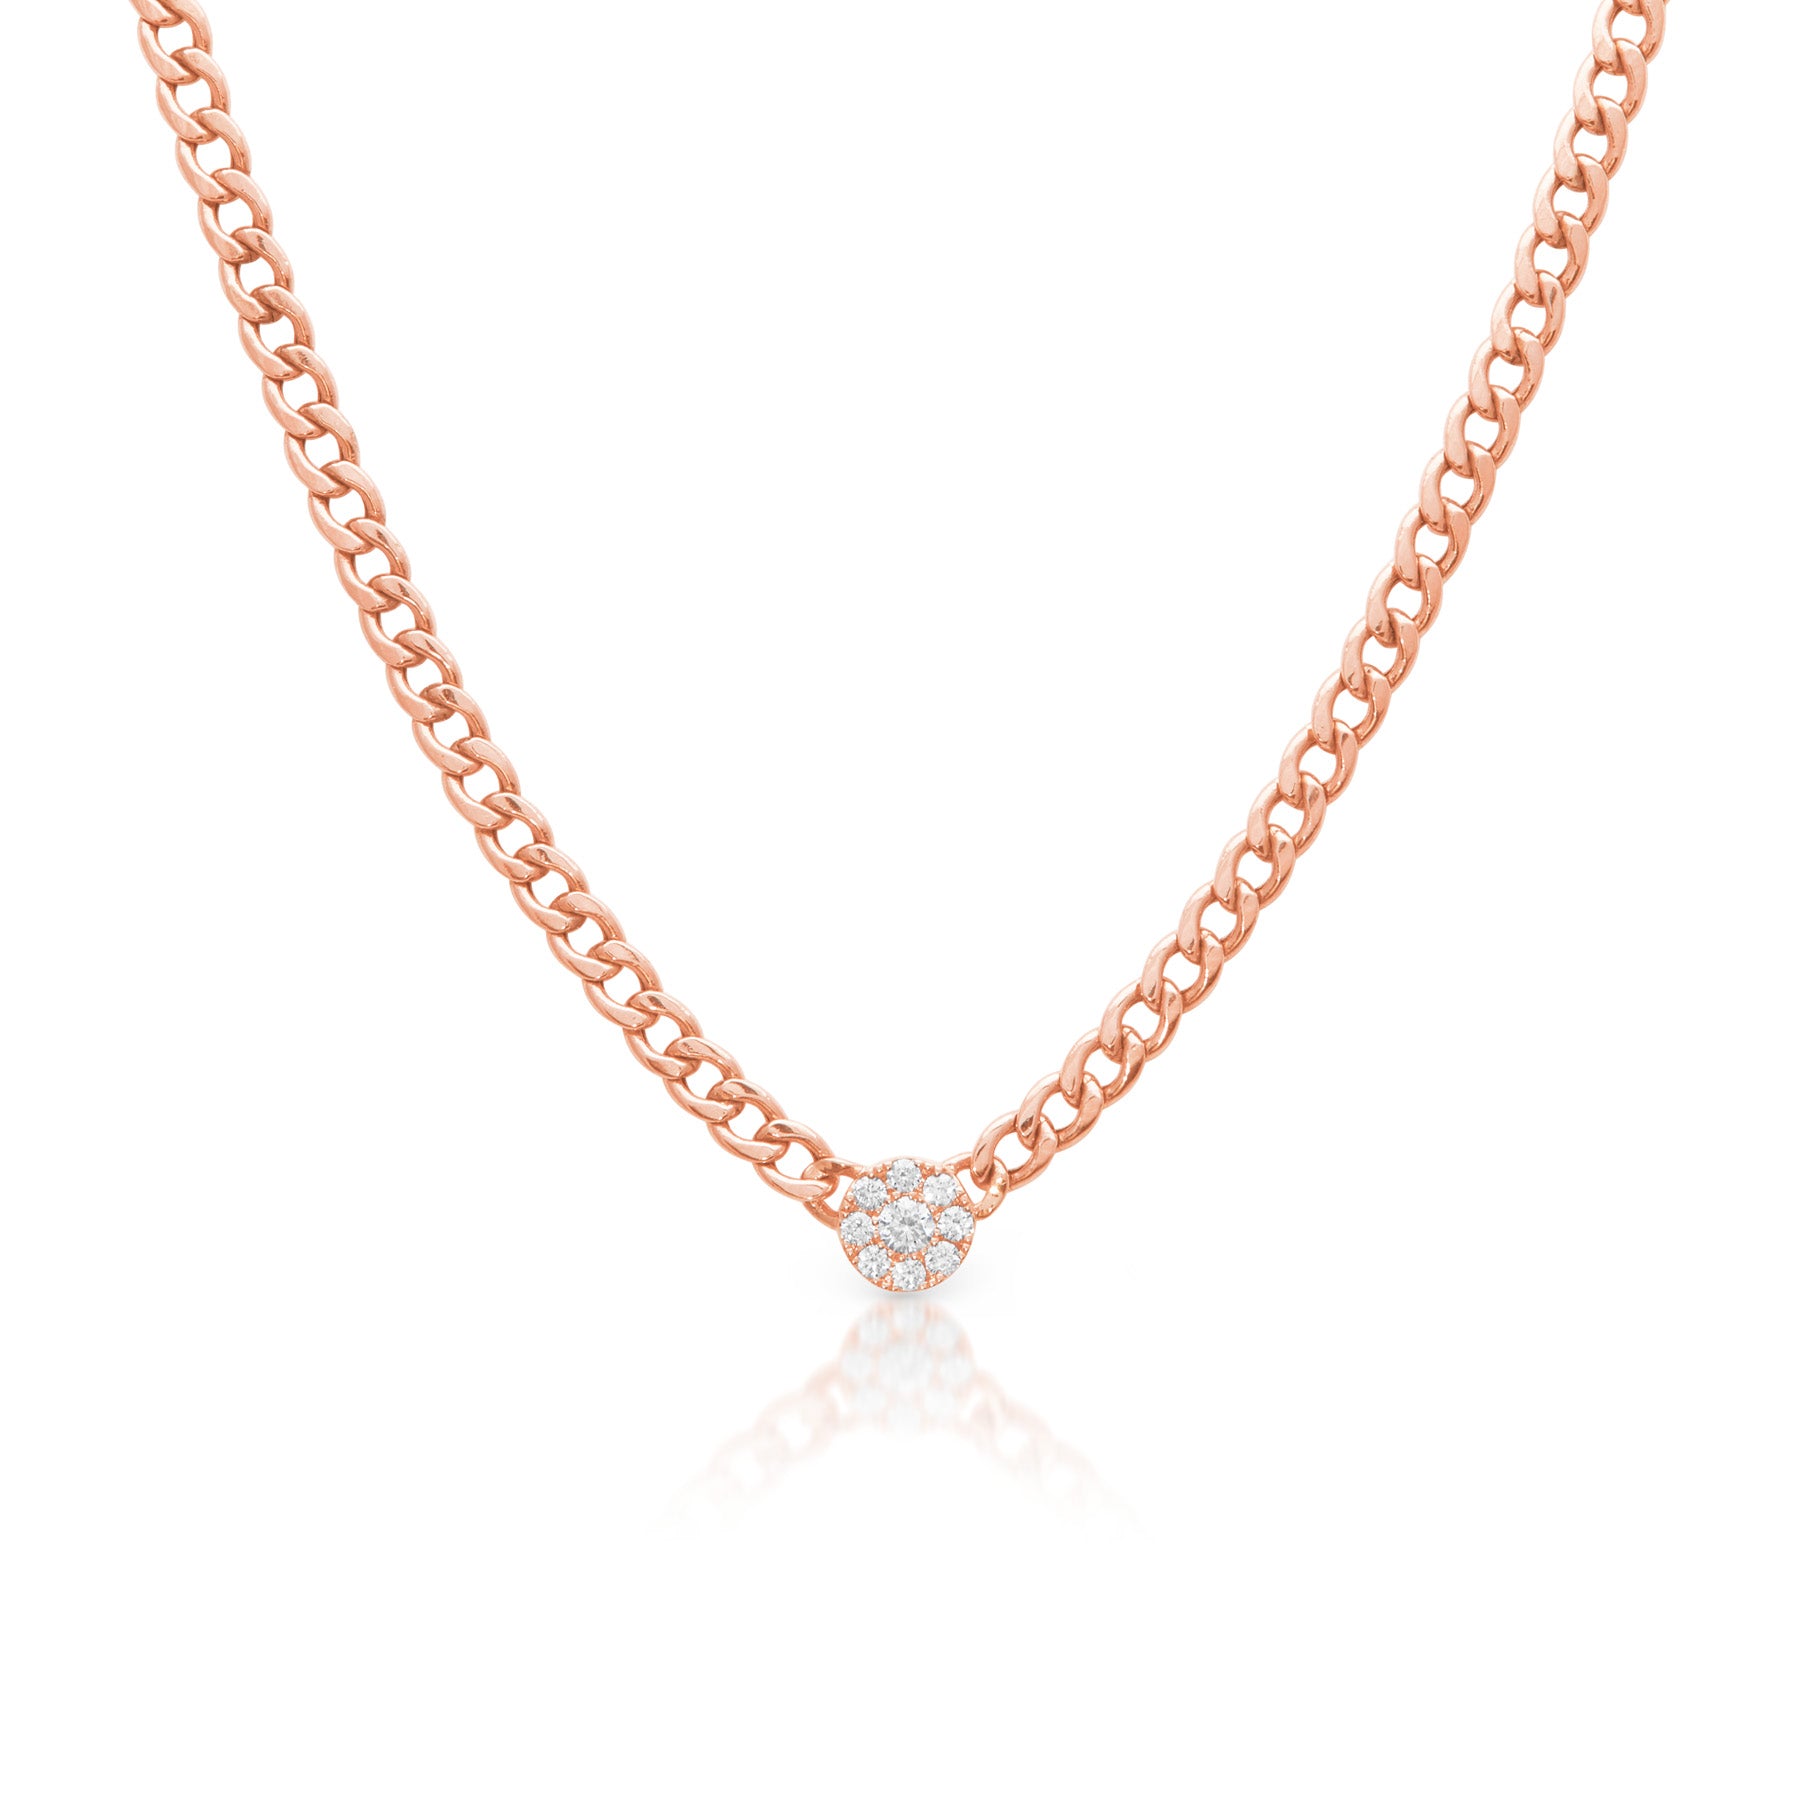 14KT Rose Gold Round Diamond Chain Link Necklace